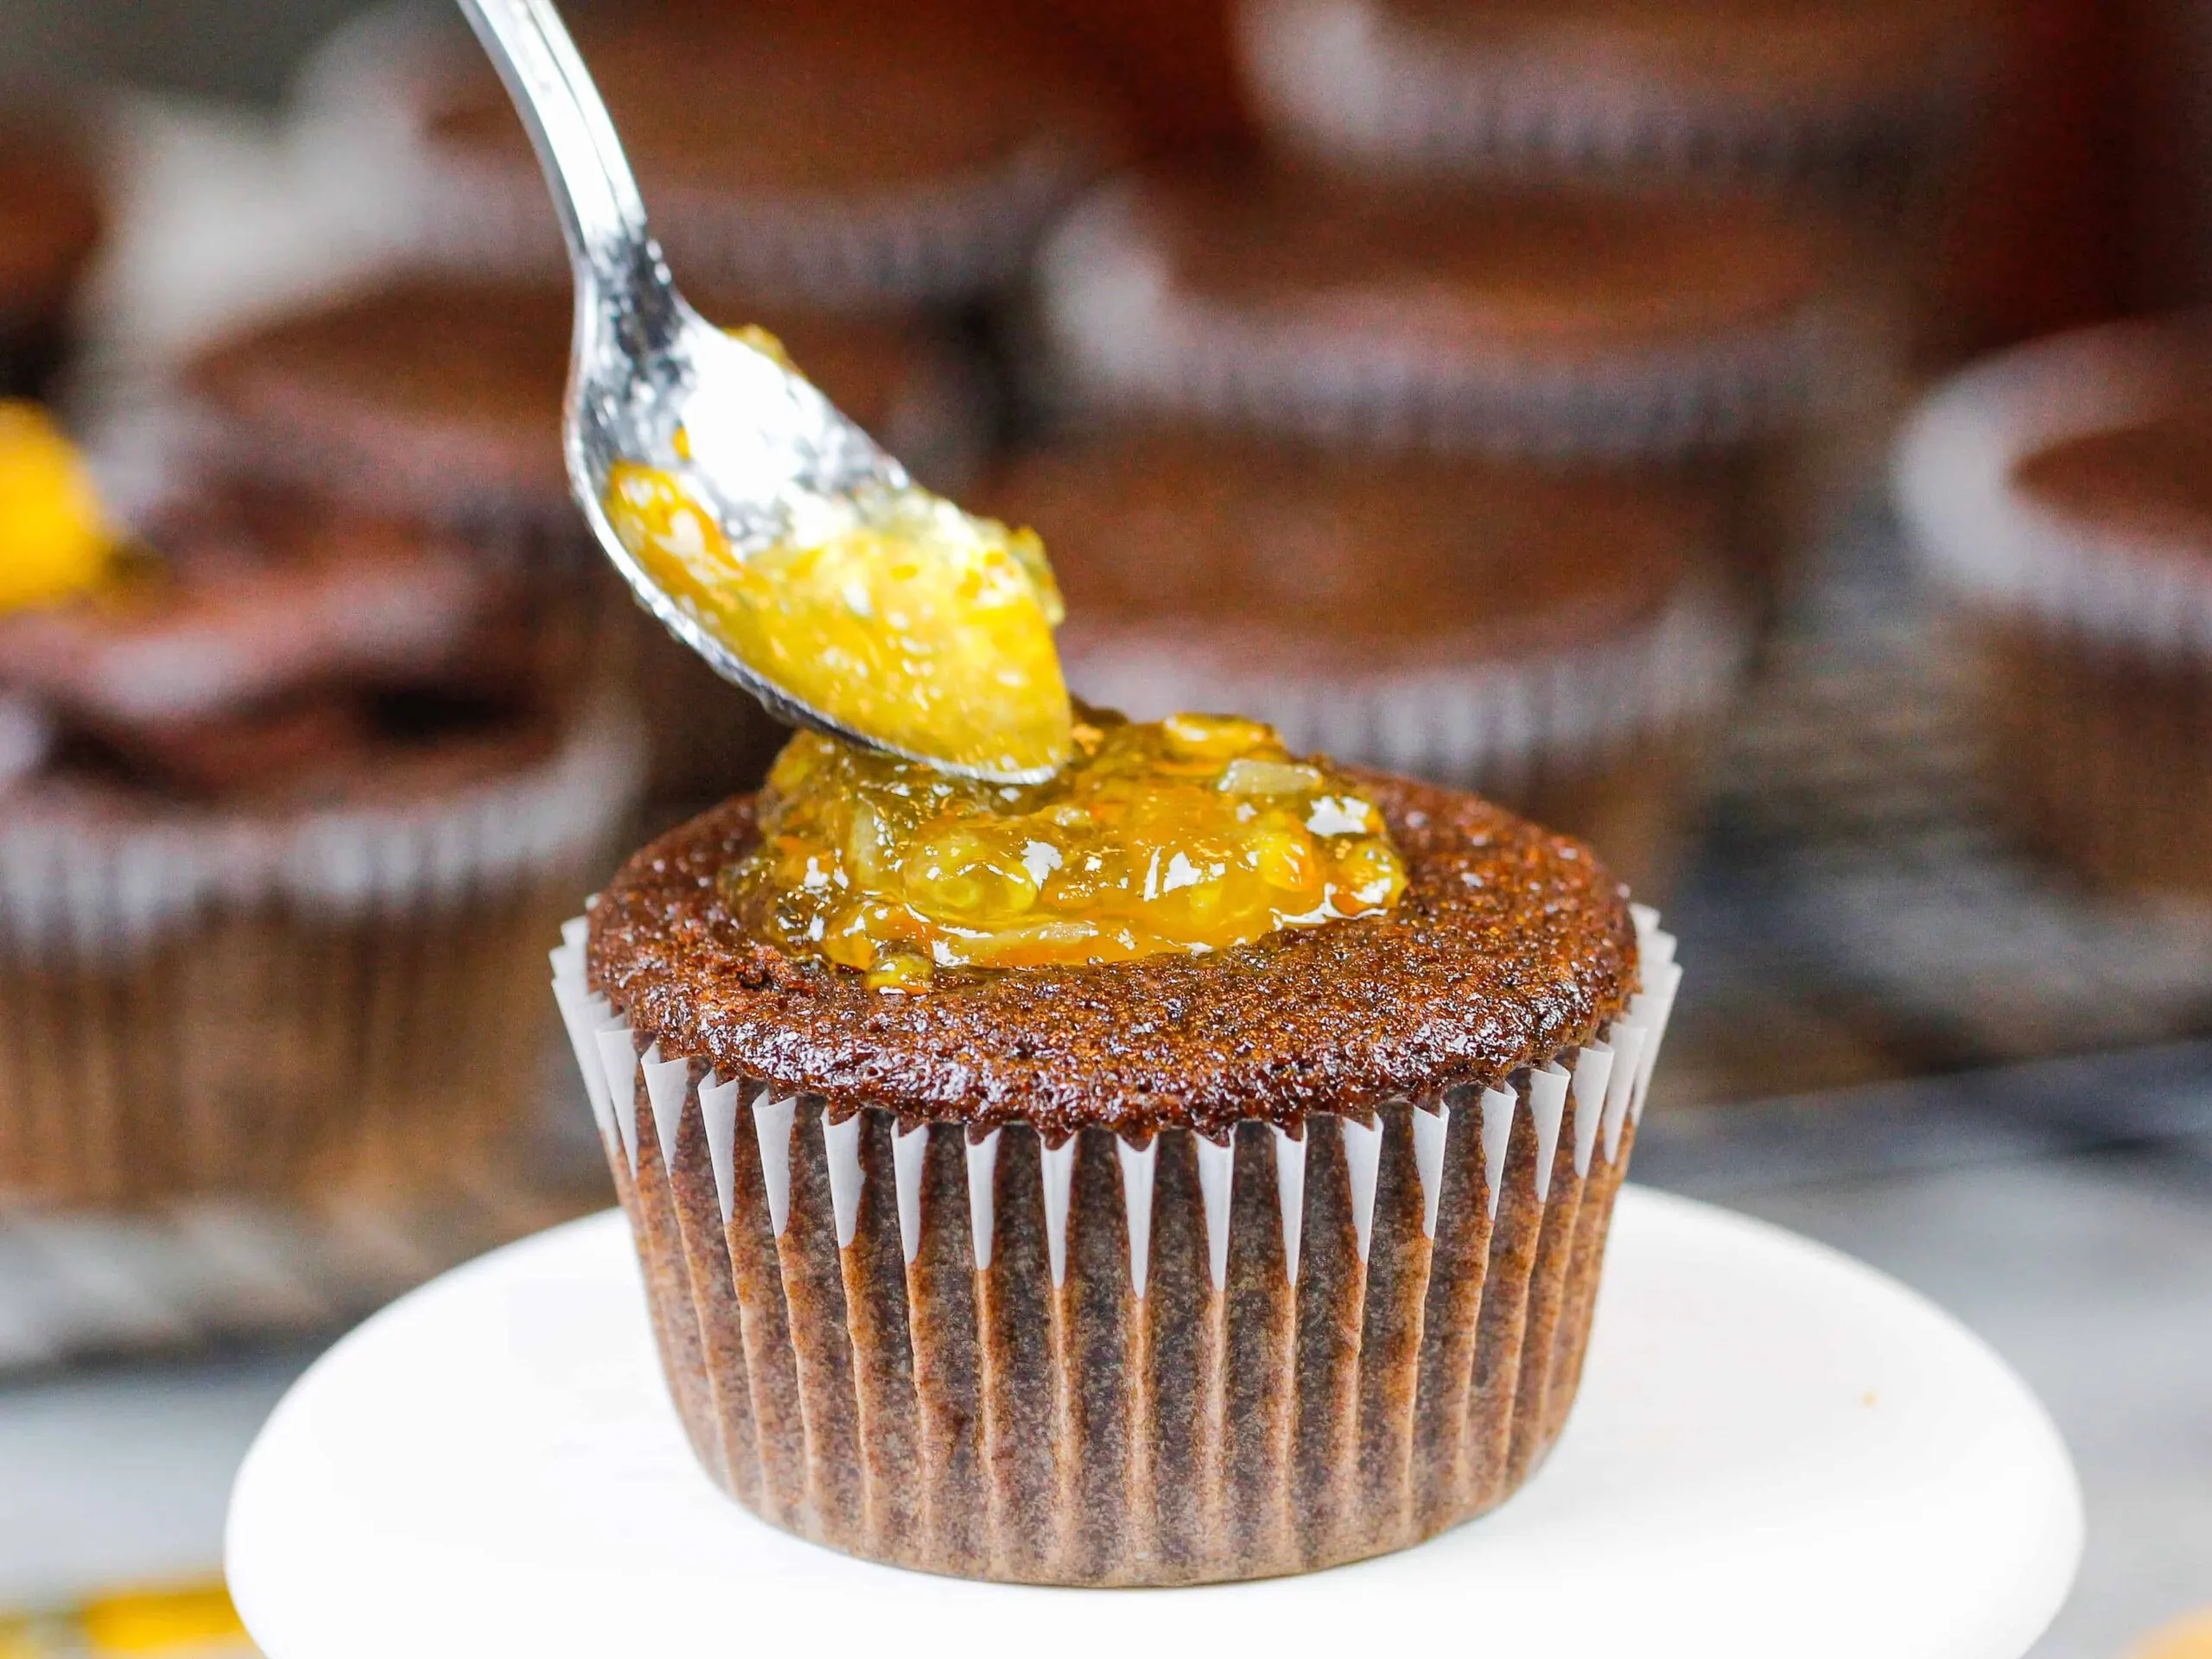 image of chocolate cupcakes being filled with orange marmalade